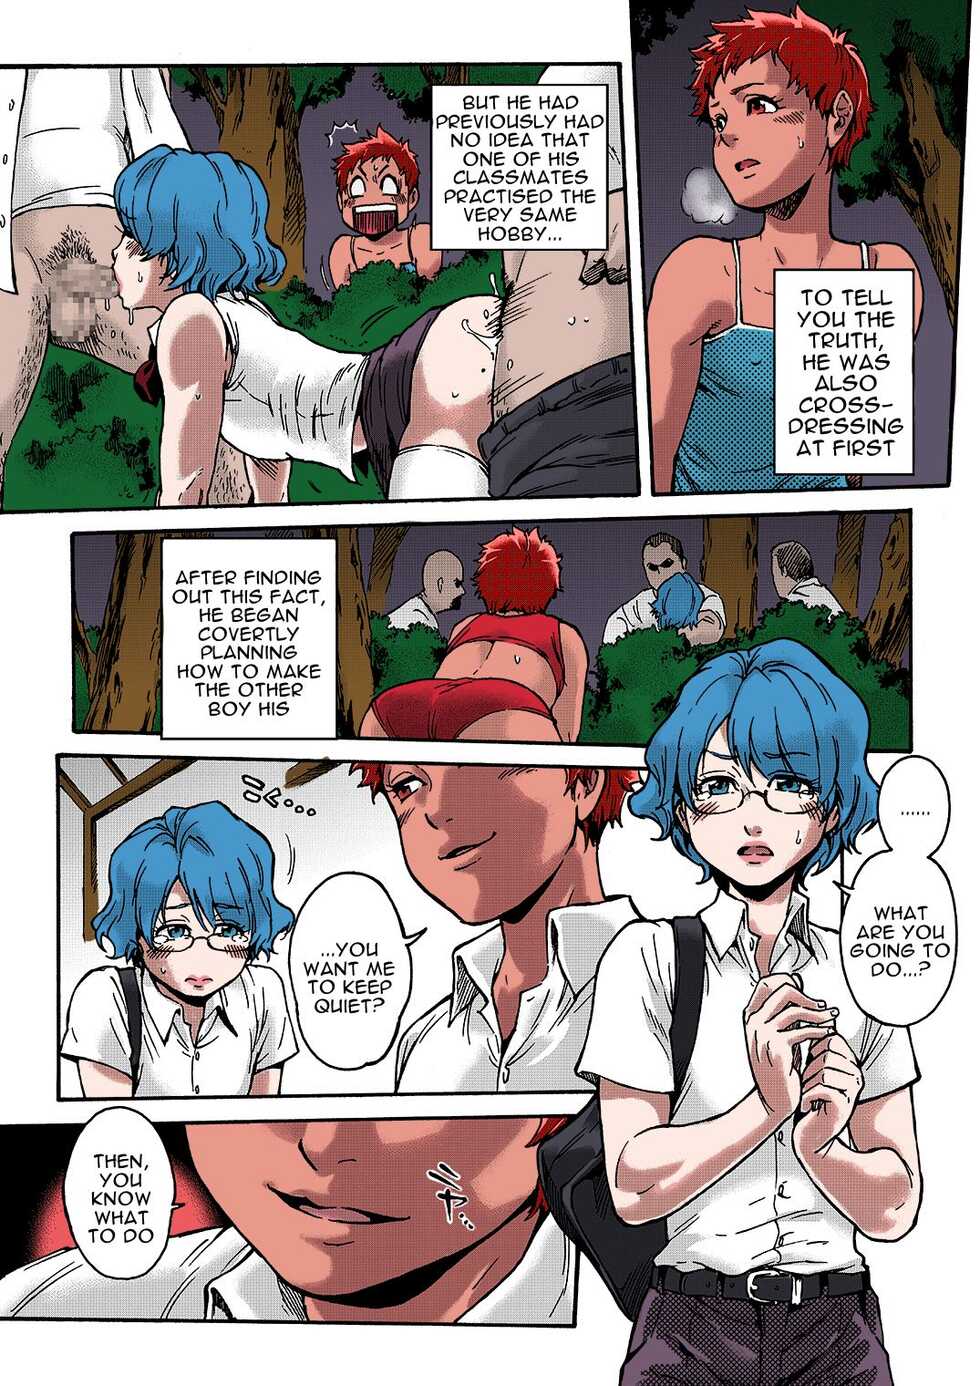 [Shotaian (Aian)] Horny Beetles [English] [n0504][Colorized] - Page 15